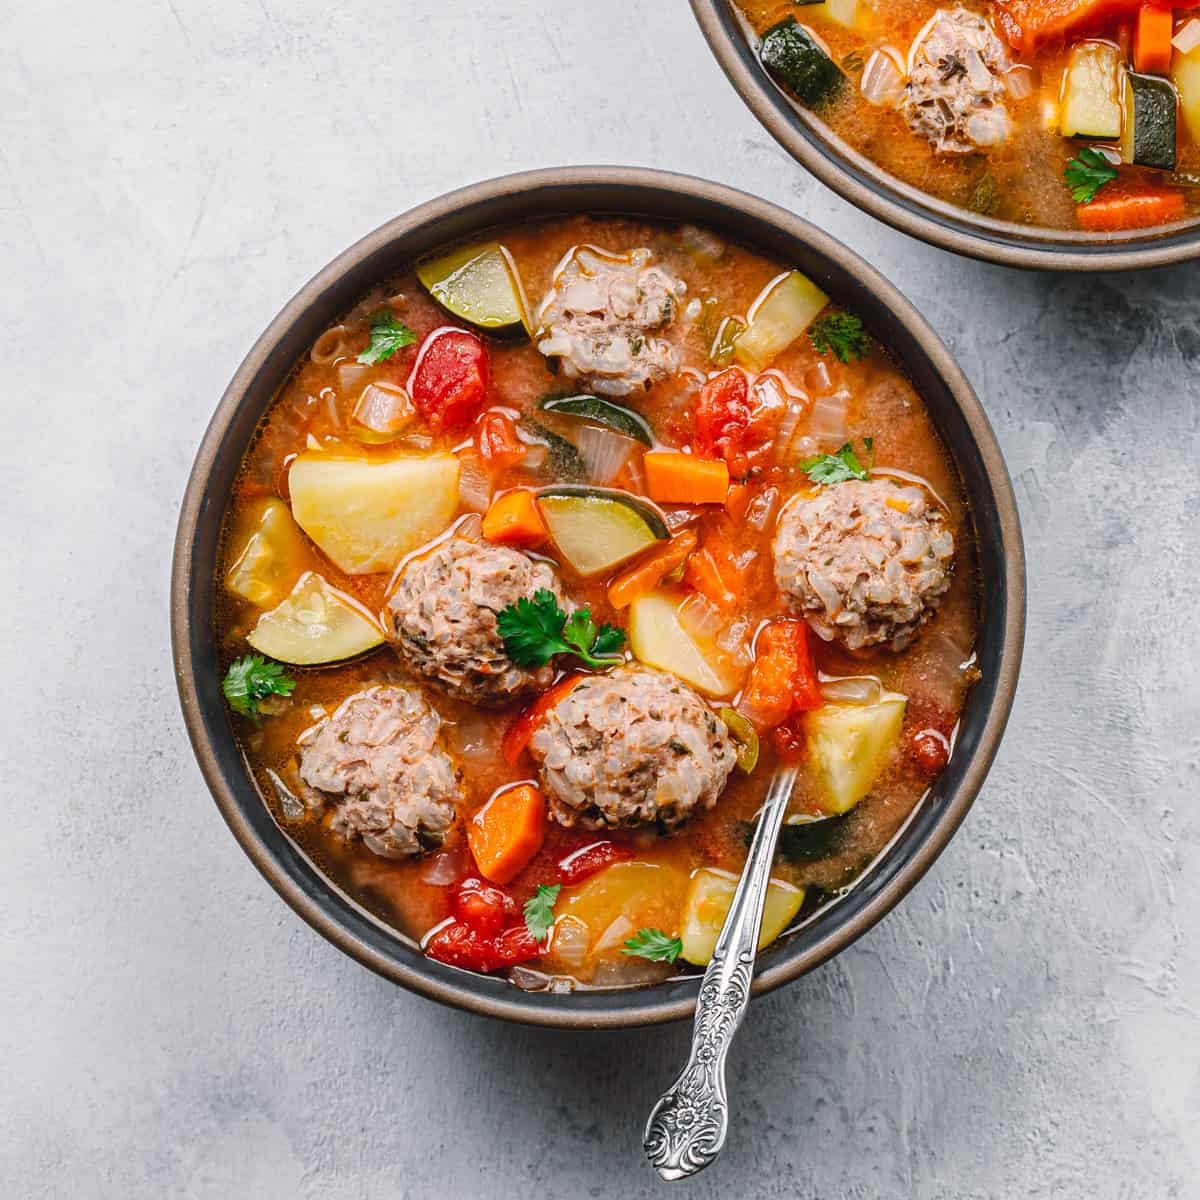 Beef Meatball Soups with Vegetables